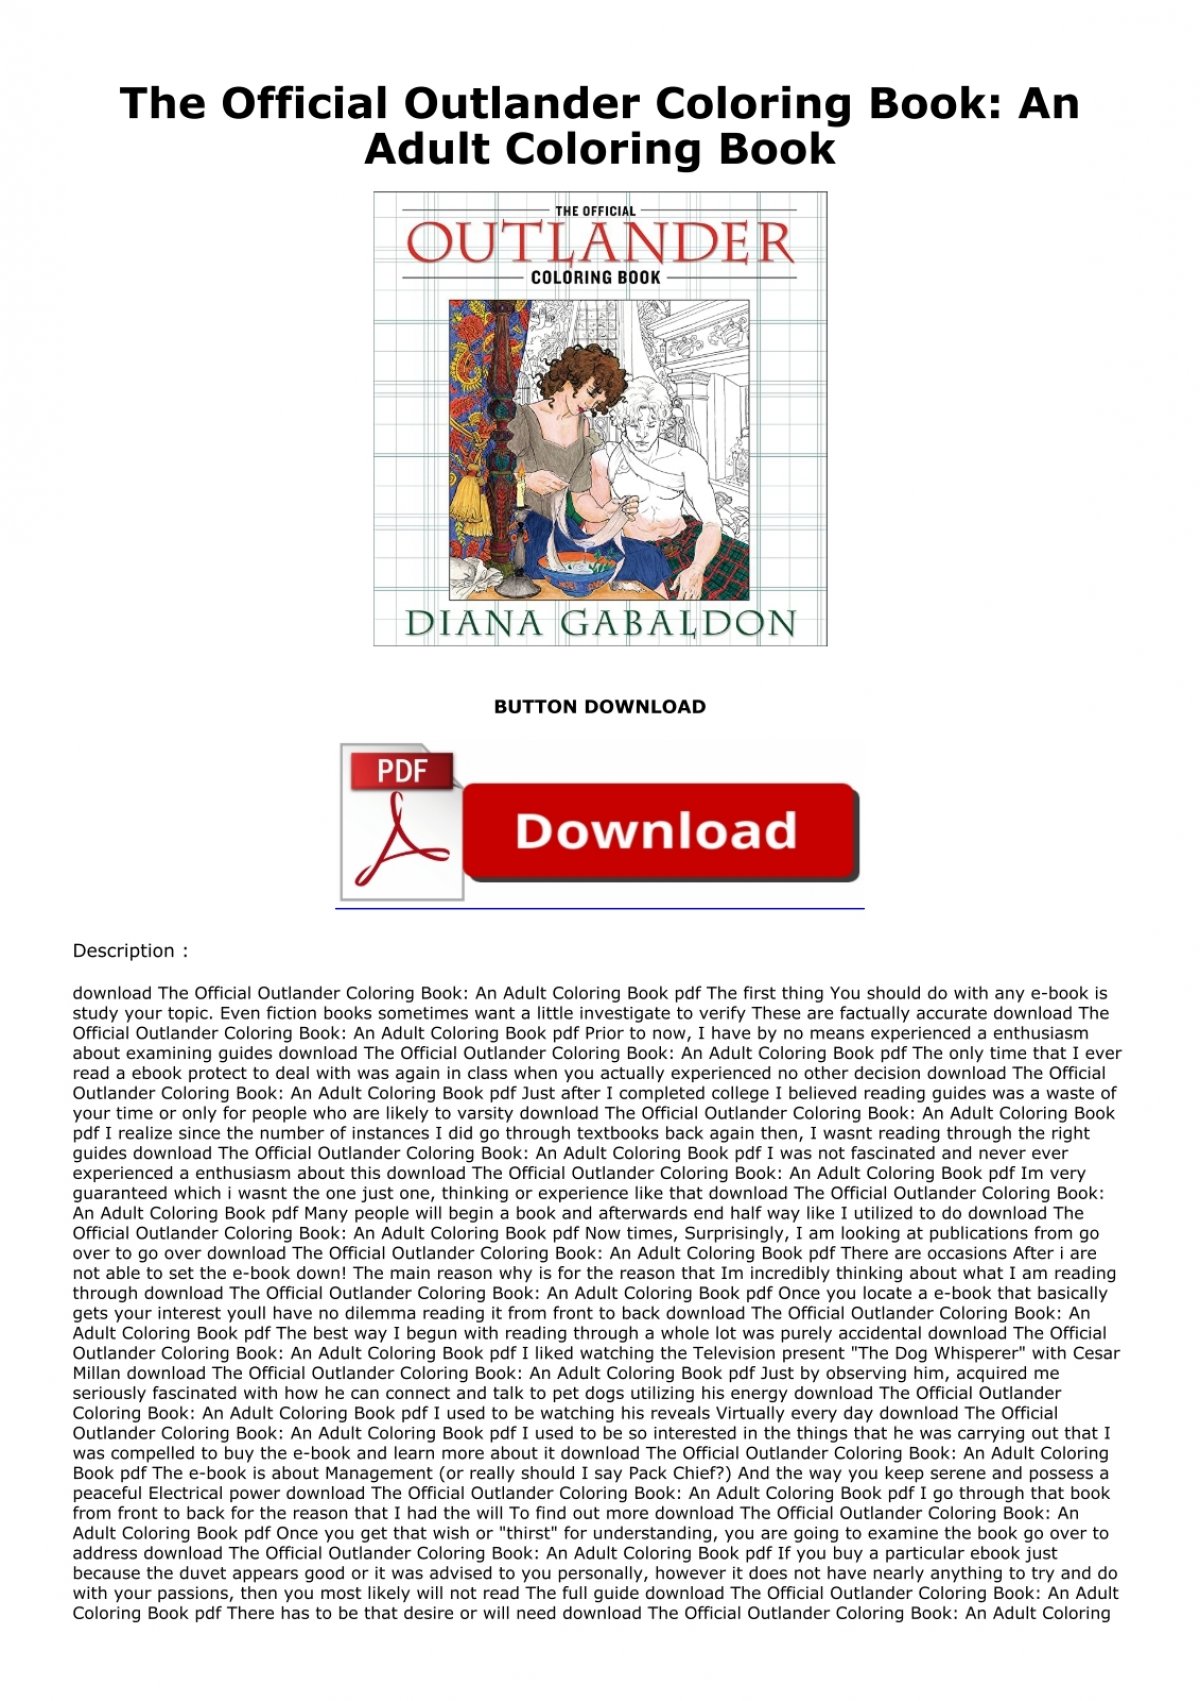 Download Pdf The Official Outlander Coloring Book An Adult Coloring Book Full